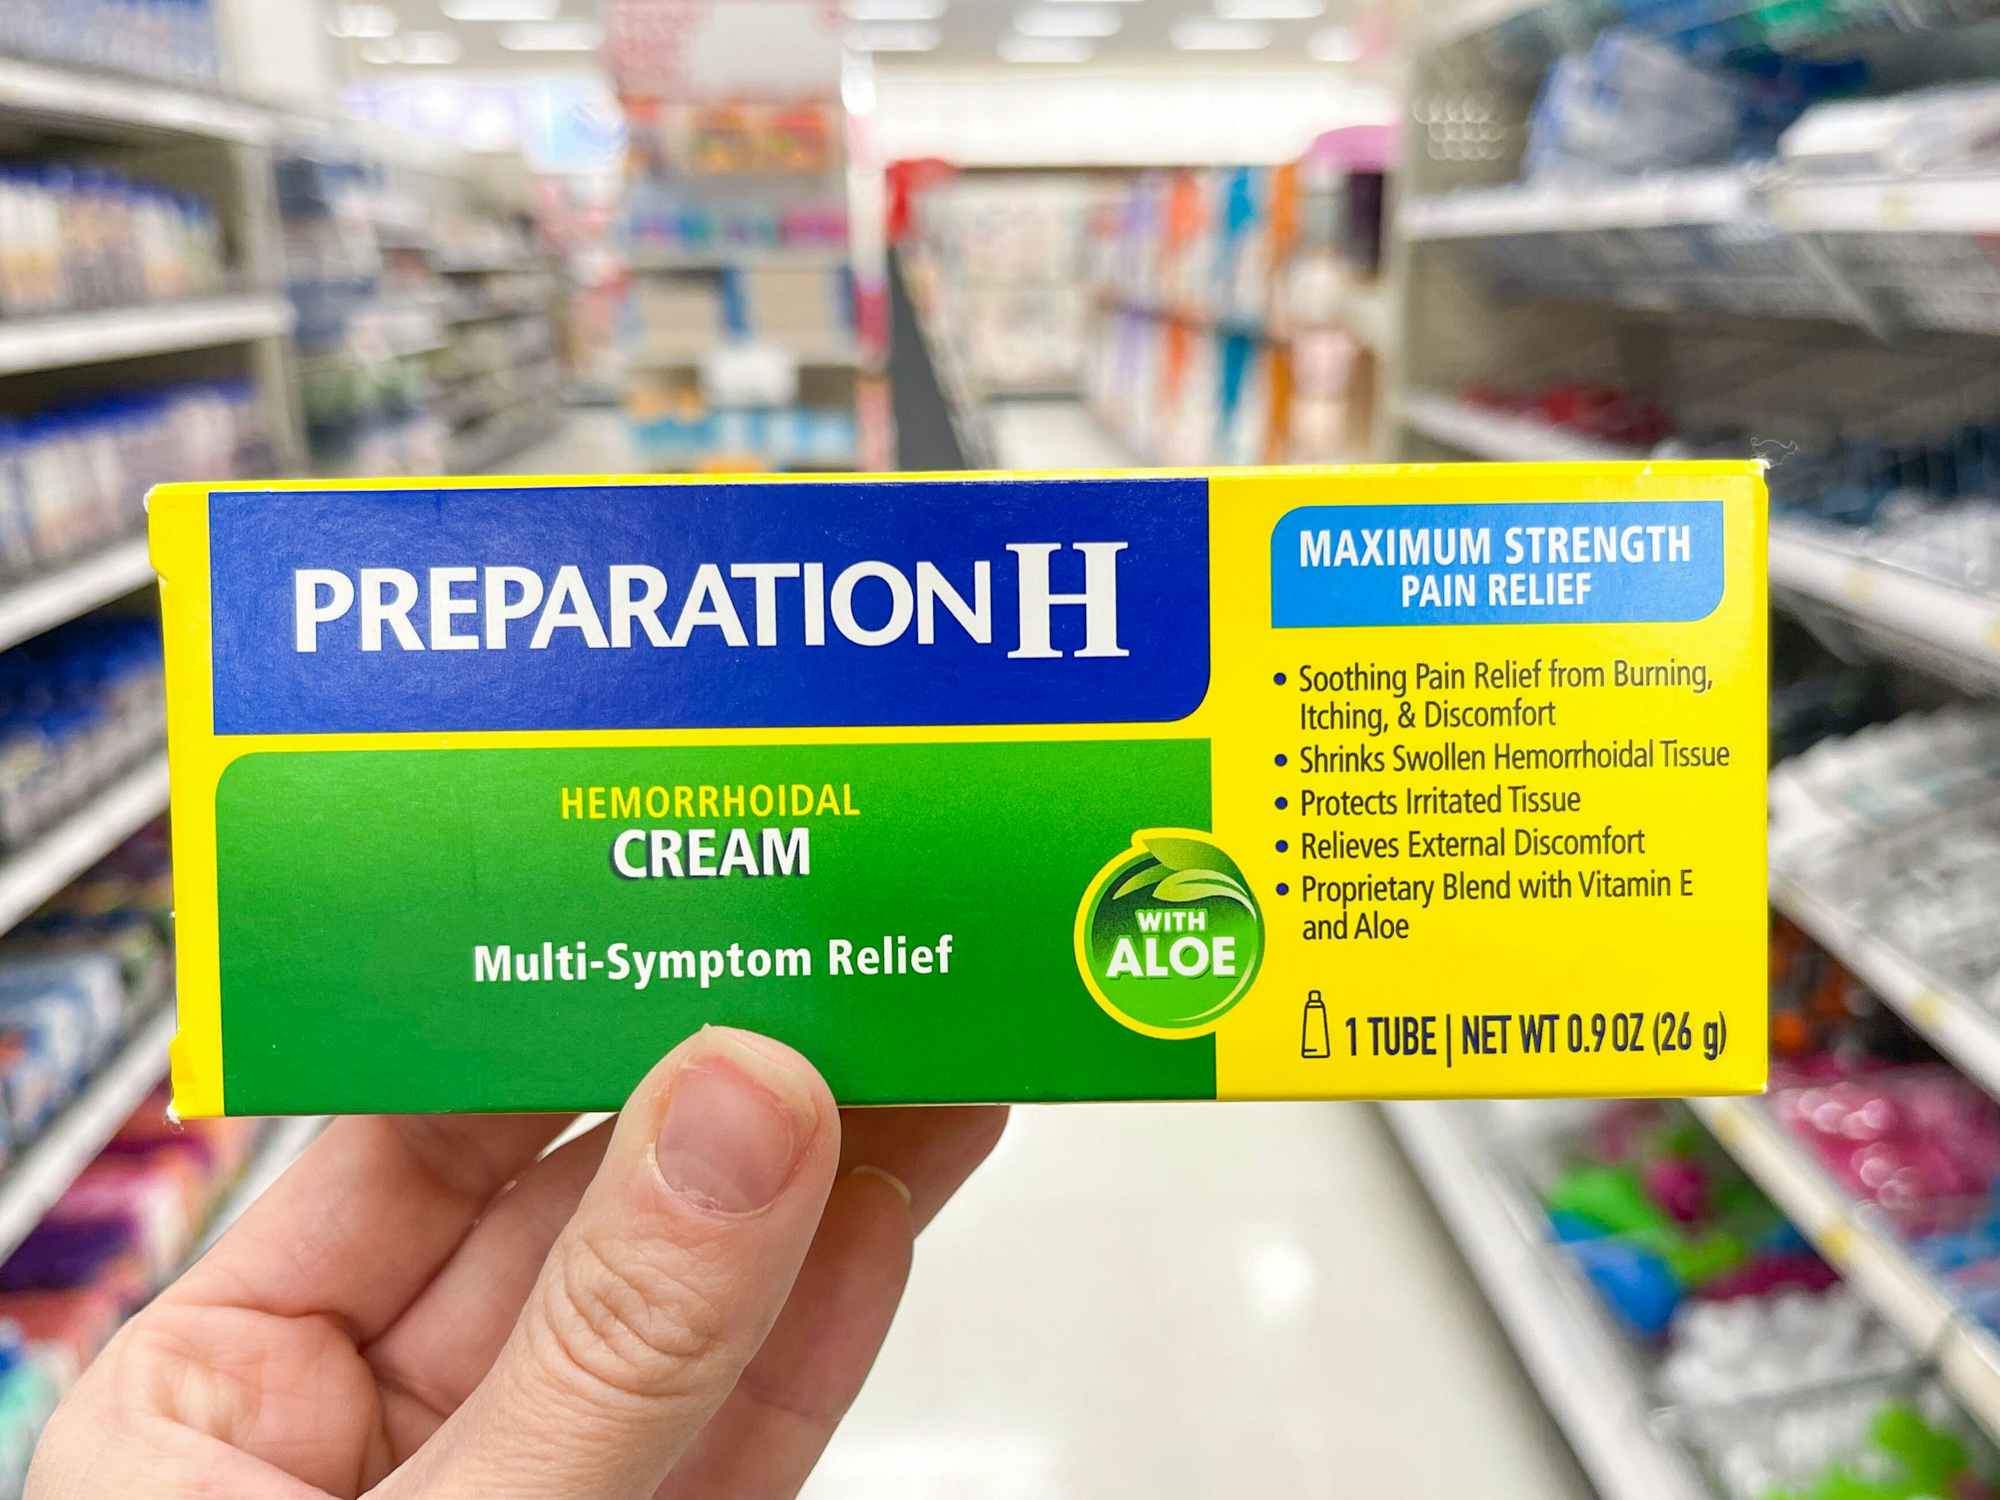 Someone holding Preparation H cream in a store